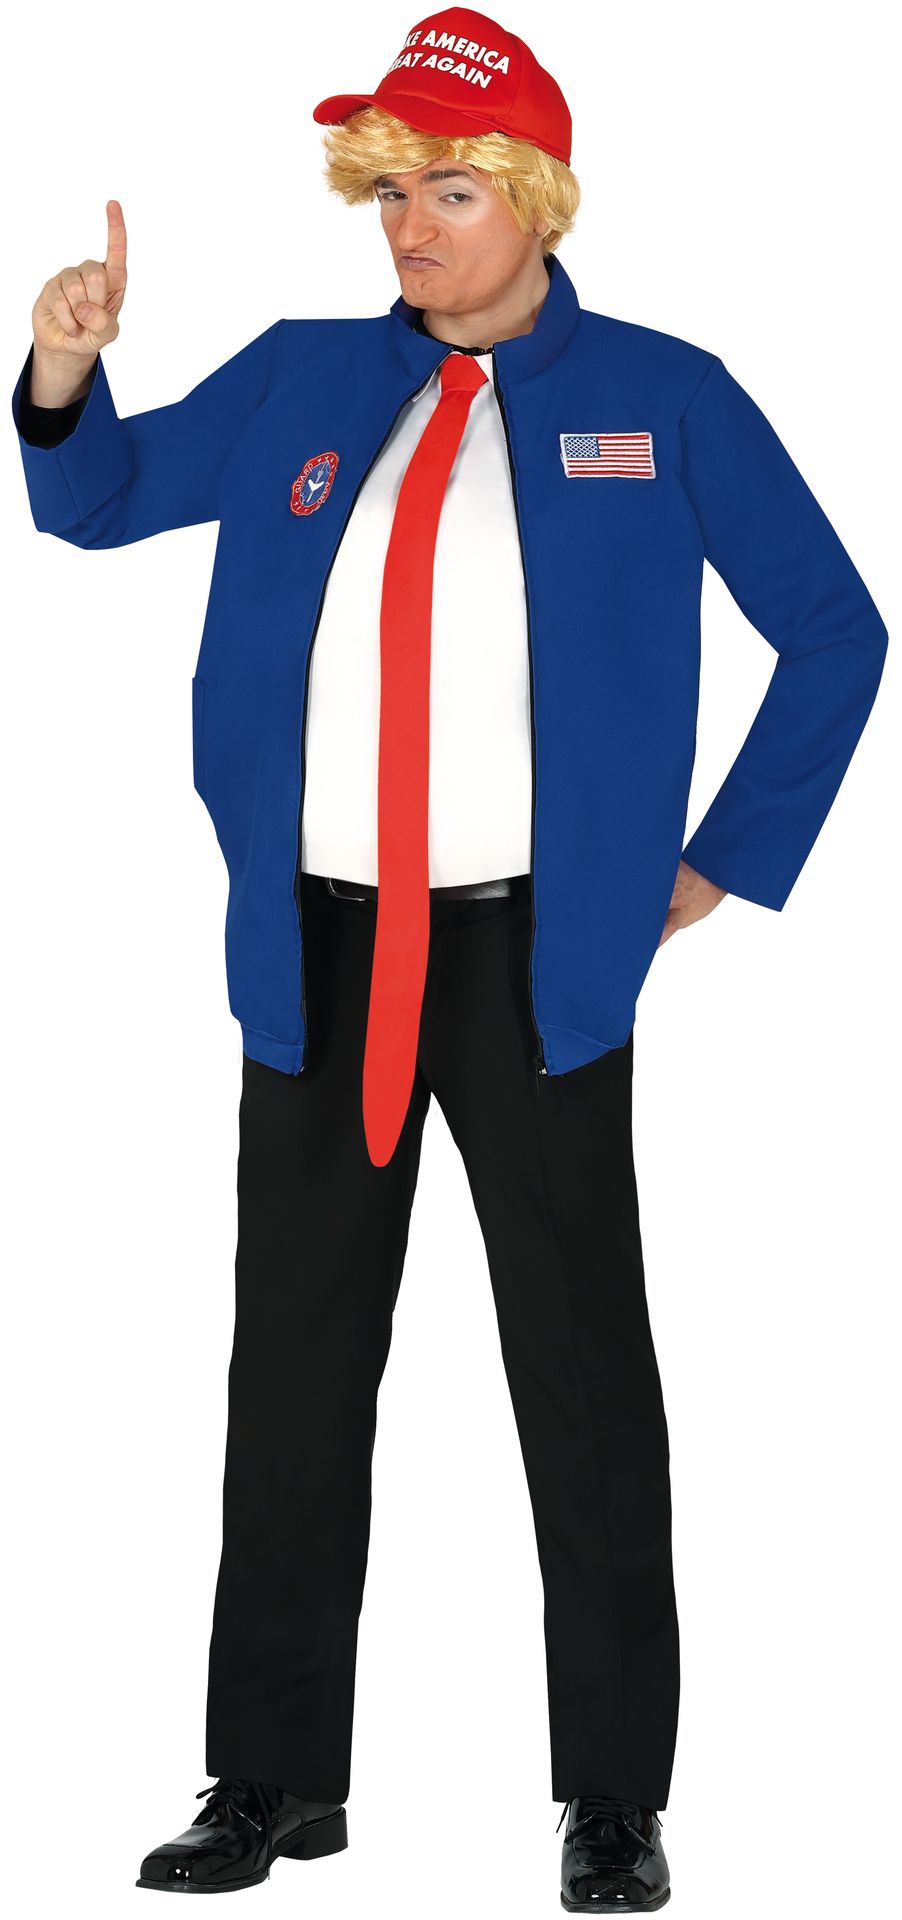 Trump outfit